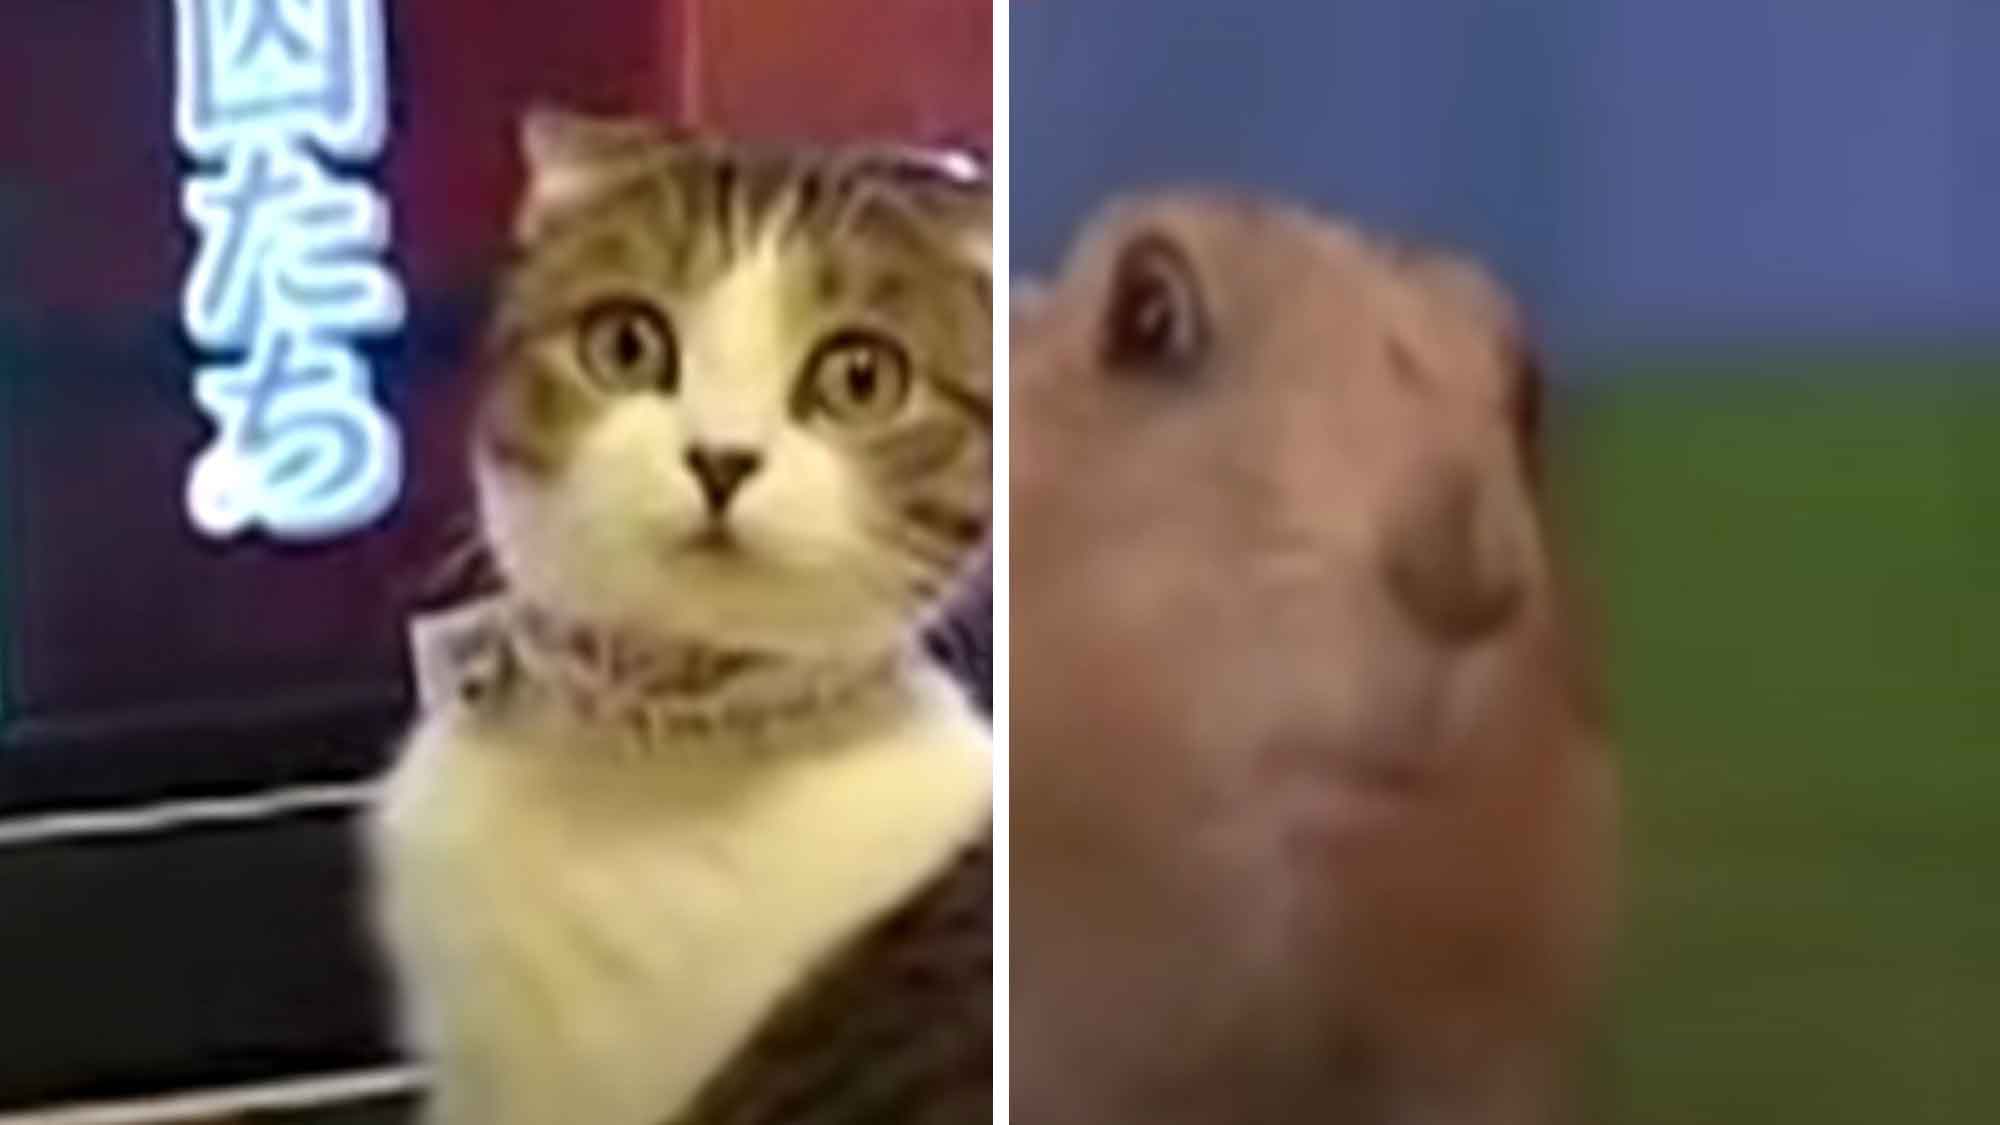 Dramatic Cat vs Dramatic Chipmunk: Why Are These Animal Memes So Popular?